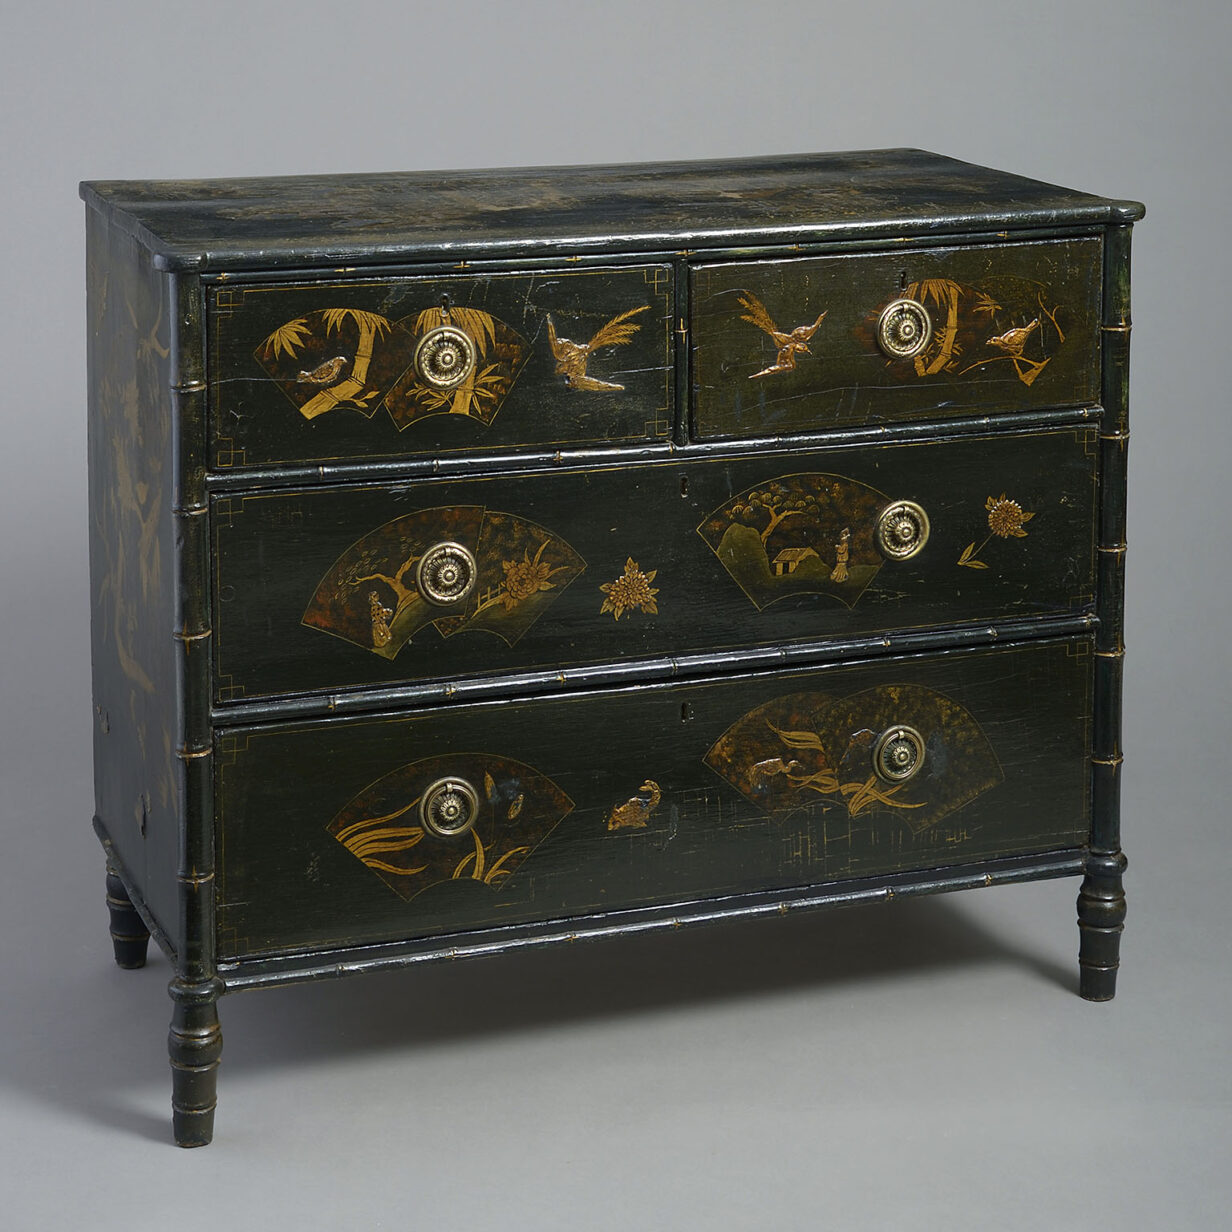 Regency japanned chest of drawers